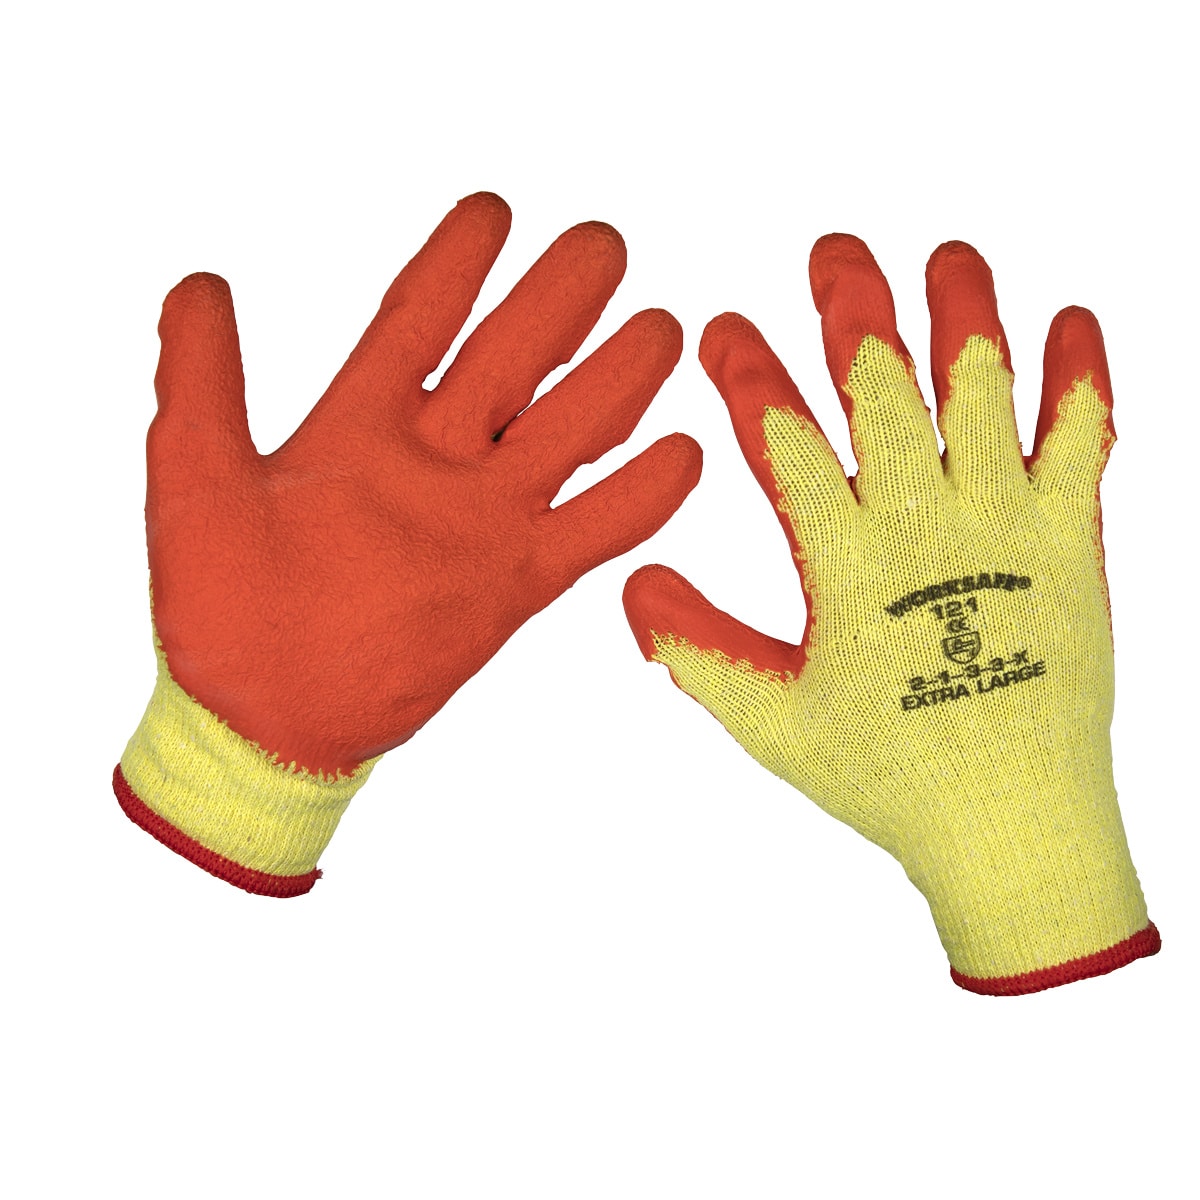 Super Grip Knitted Gloves Latex Palm (X-Large) - Pair - Triace